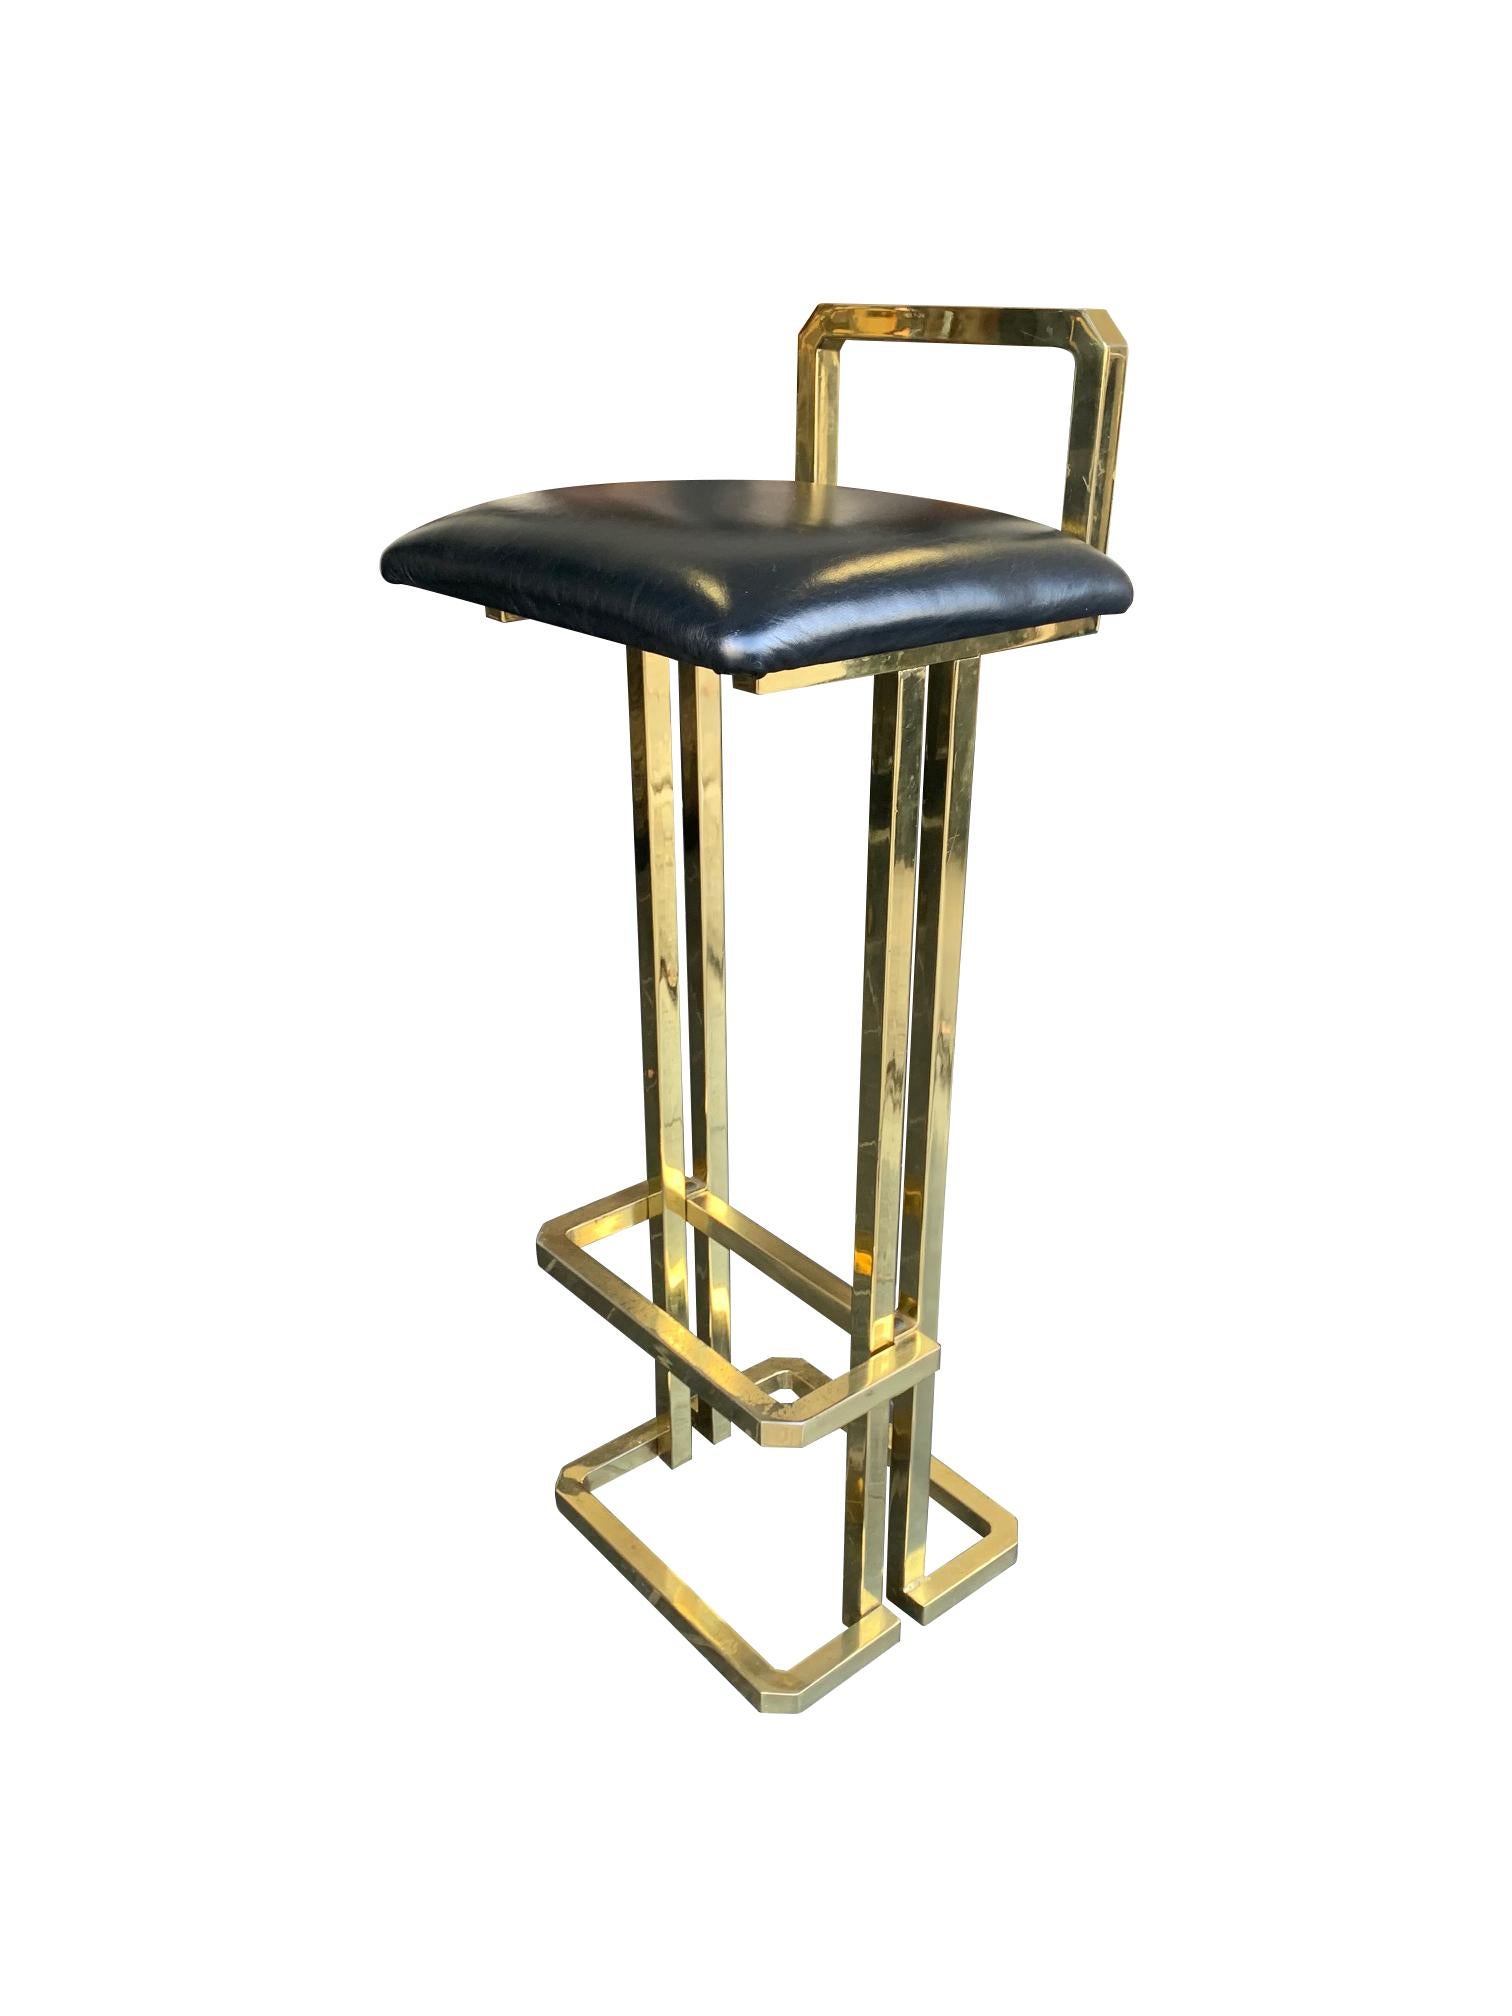 Set of 3 Maison Jansen Style Gilt Metal Stools with Black Leather Seat Pads In Good Condition For Sale In London, GB